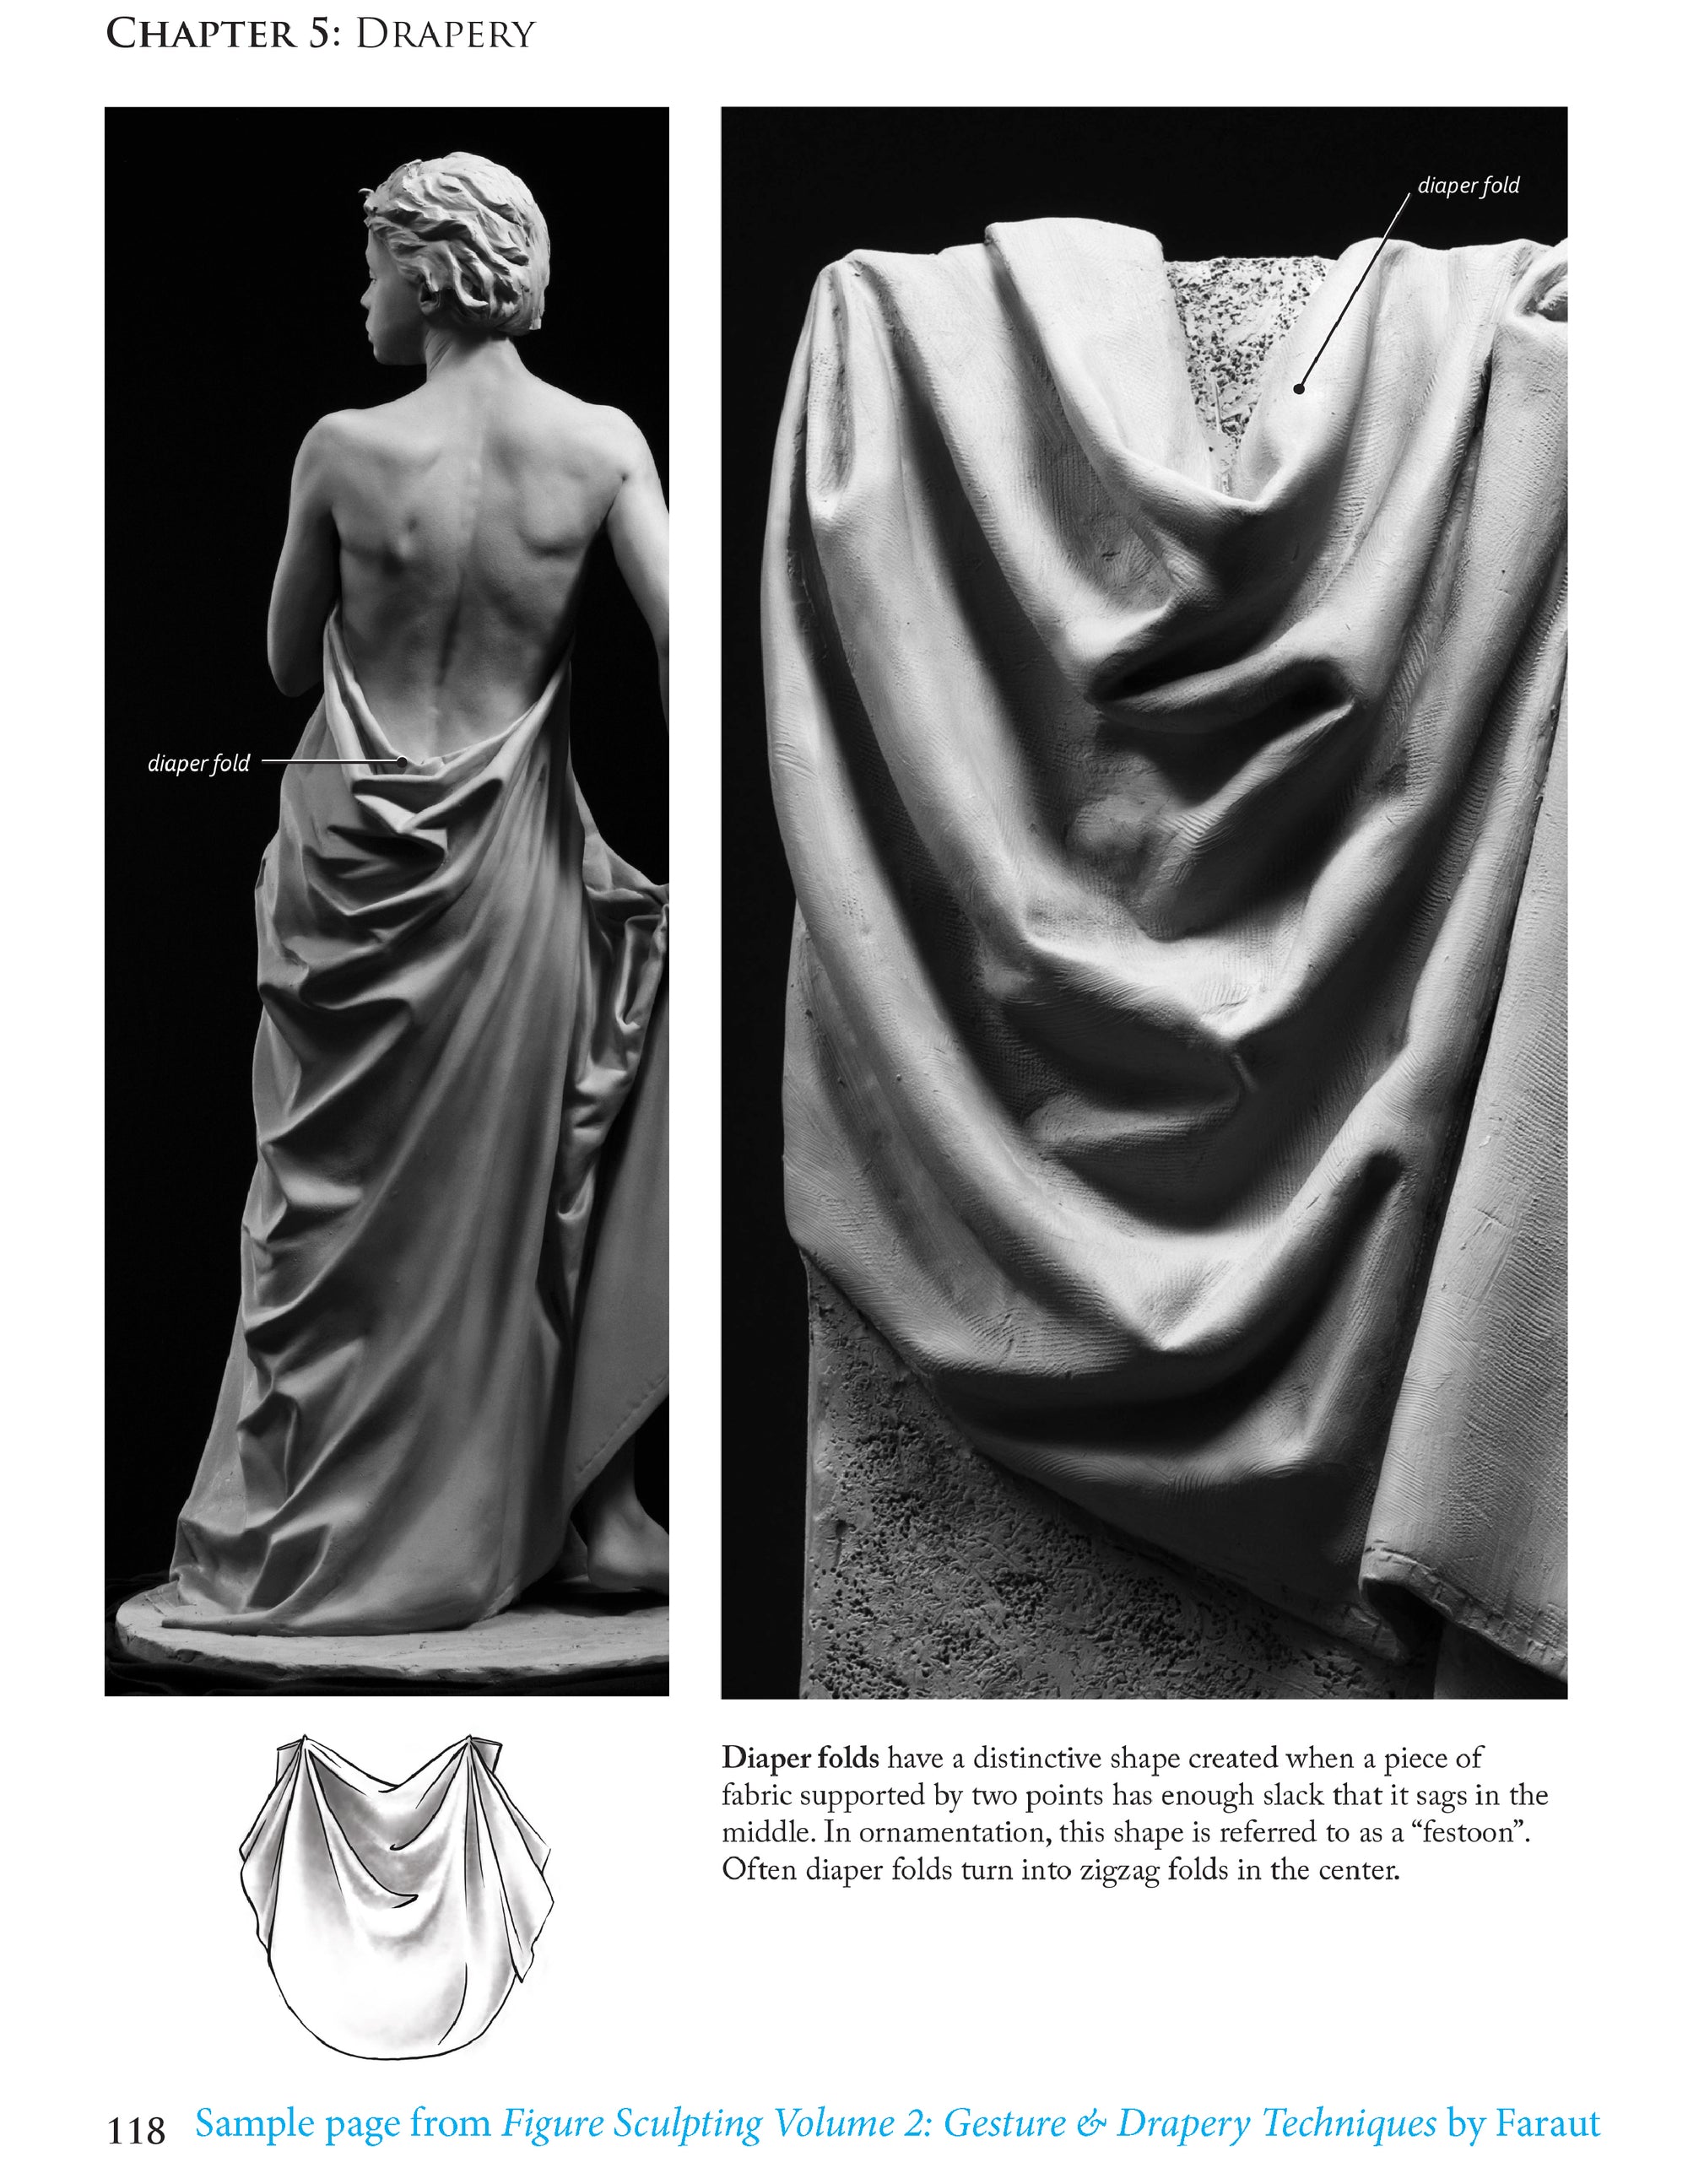  Sample page from book: Figure Sculpting Volume 2 by Faraut showing drapery in clay